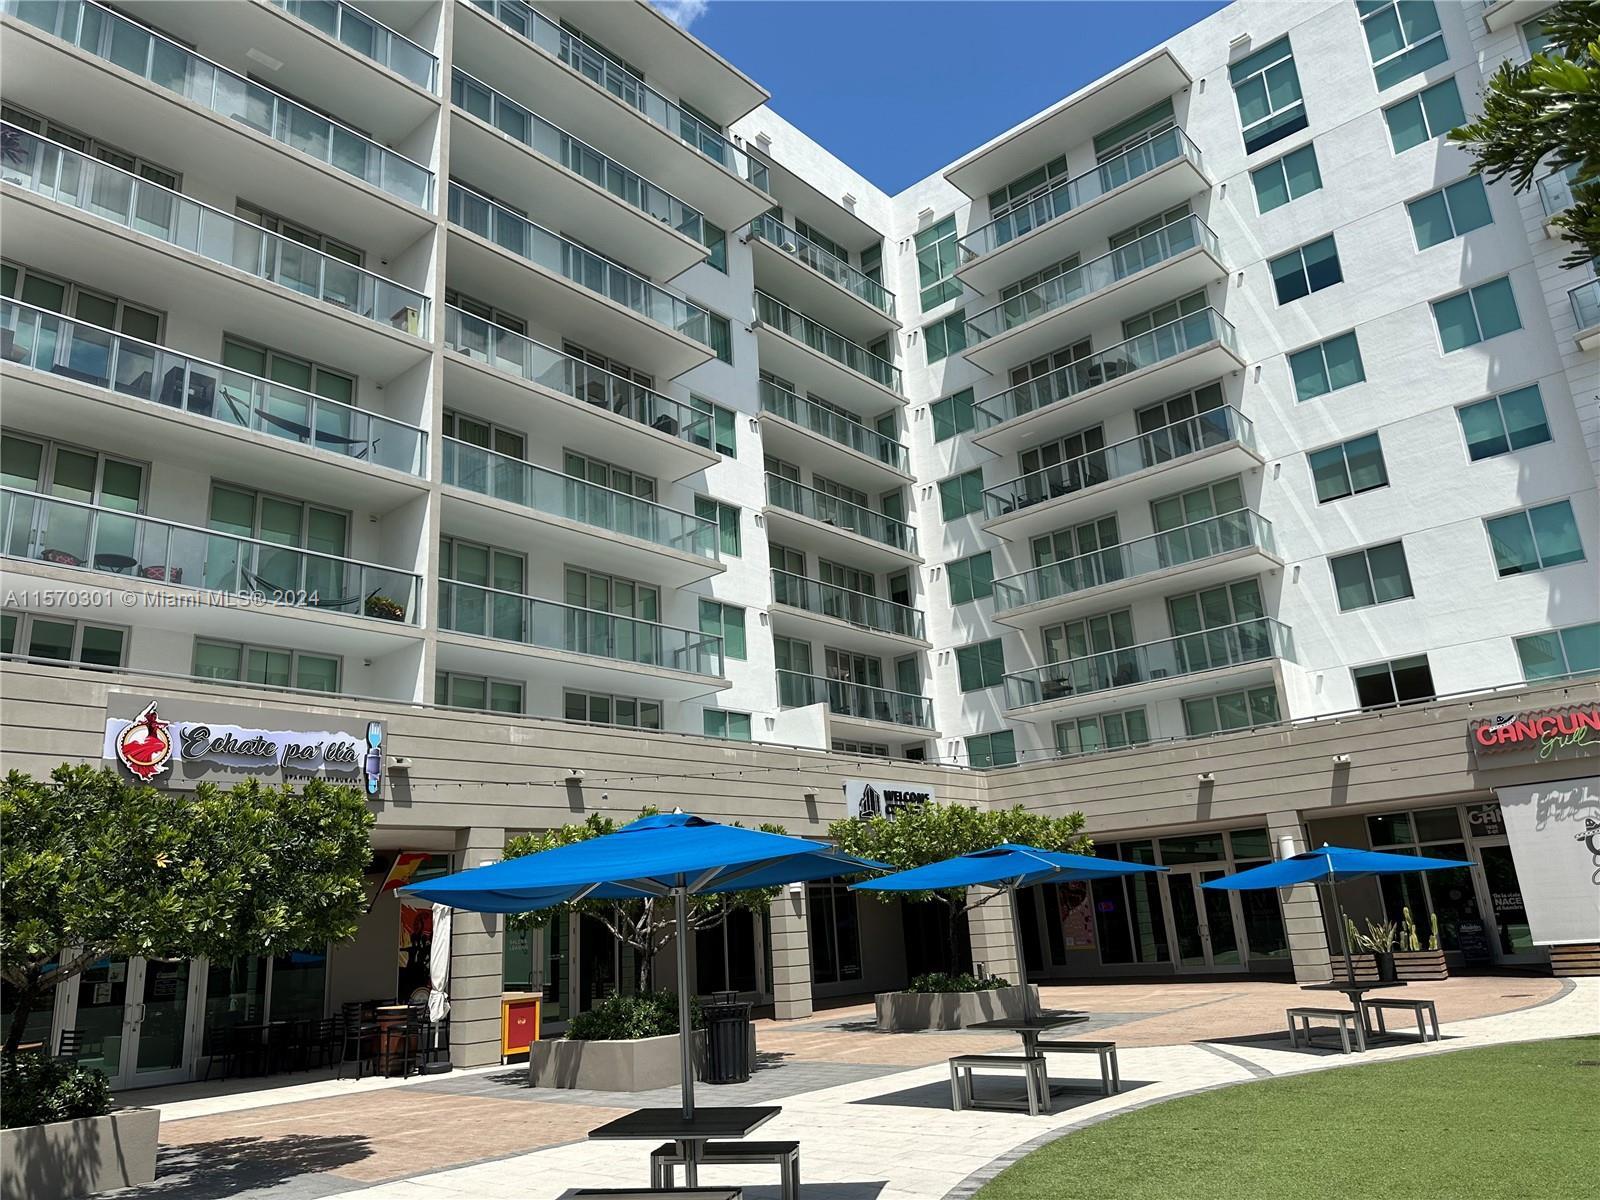 Luxury Condo 1 Bedroom 1.5 Bathroom located in the heart of Doral. Midtown Doral offers many options